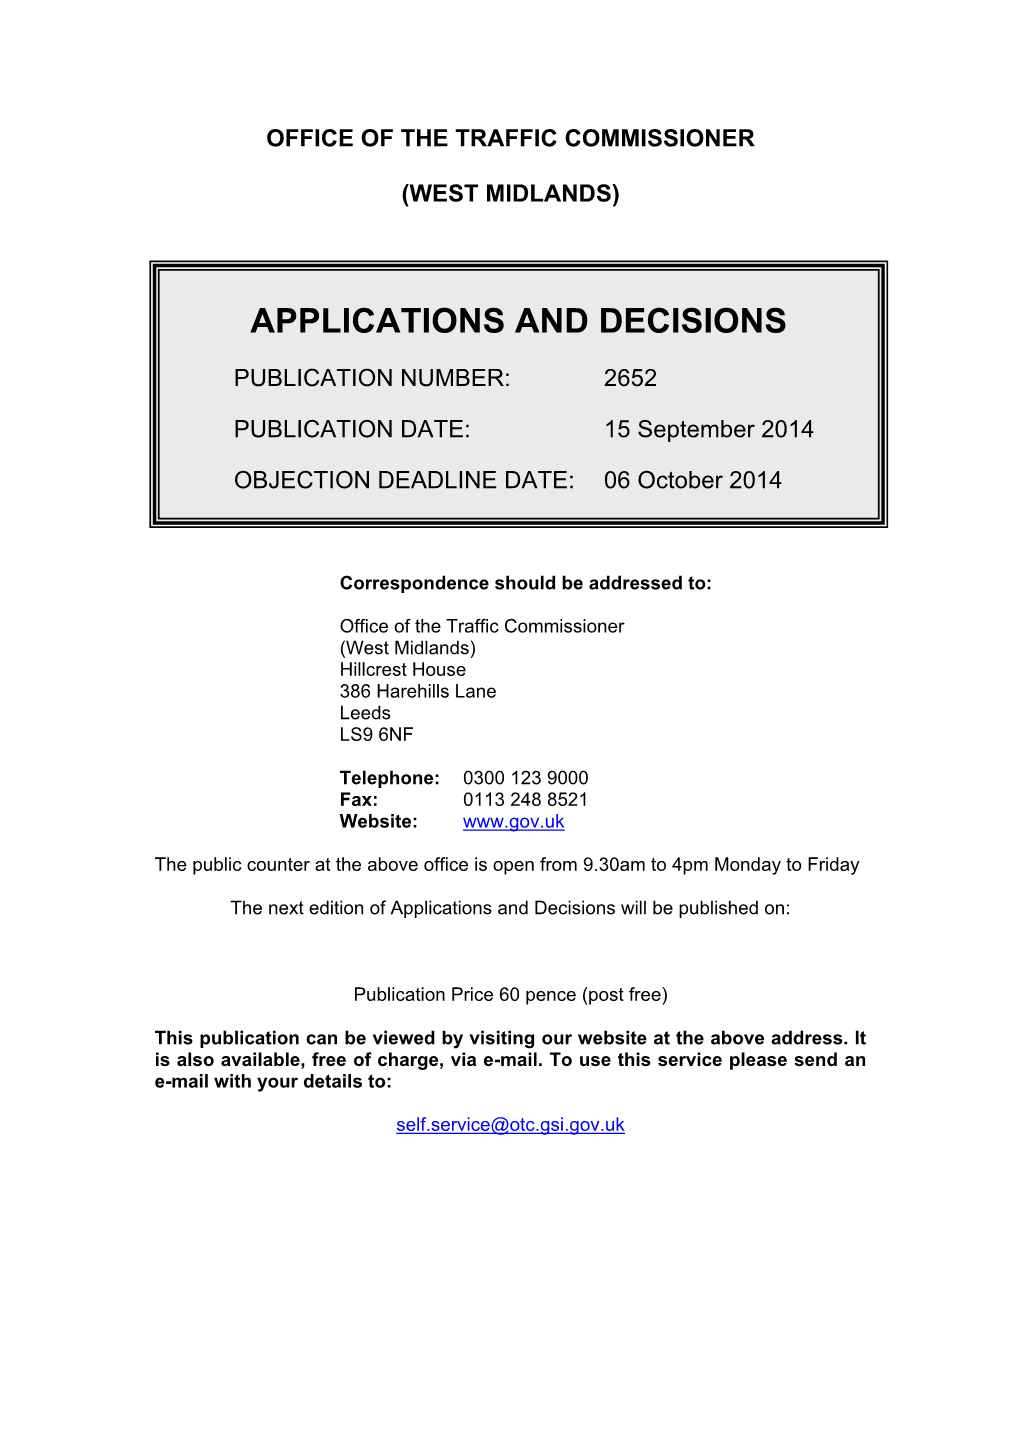 Applications and Decisions 15 September 2014